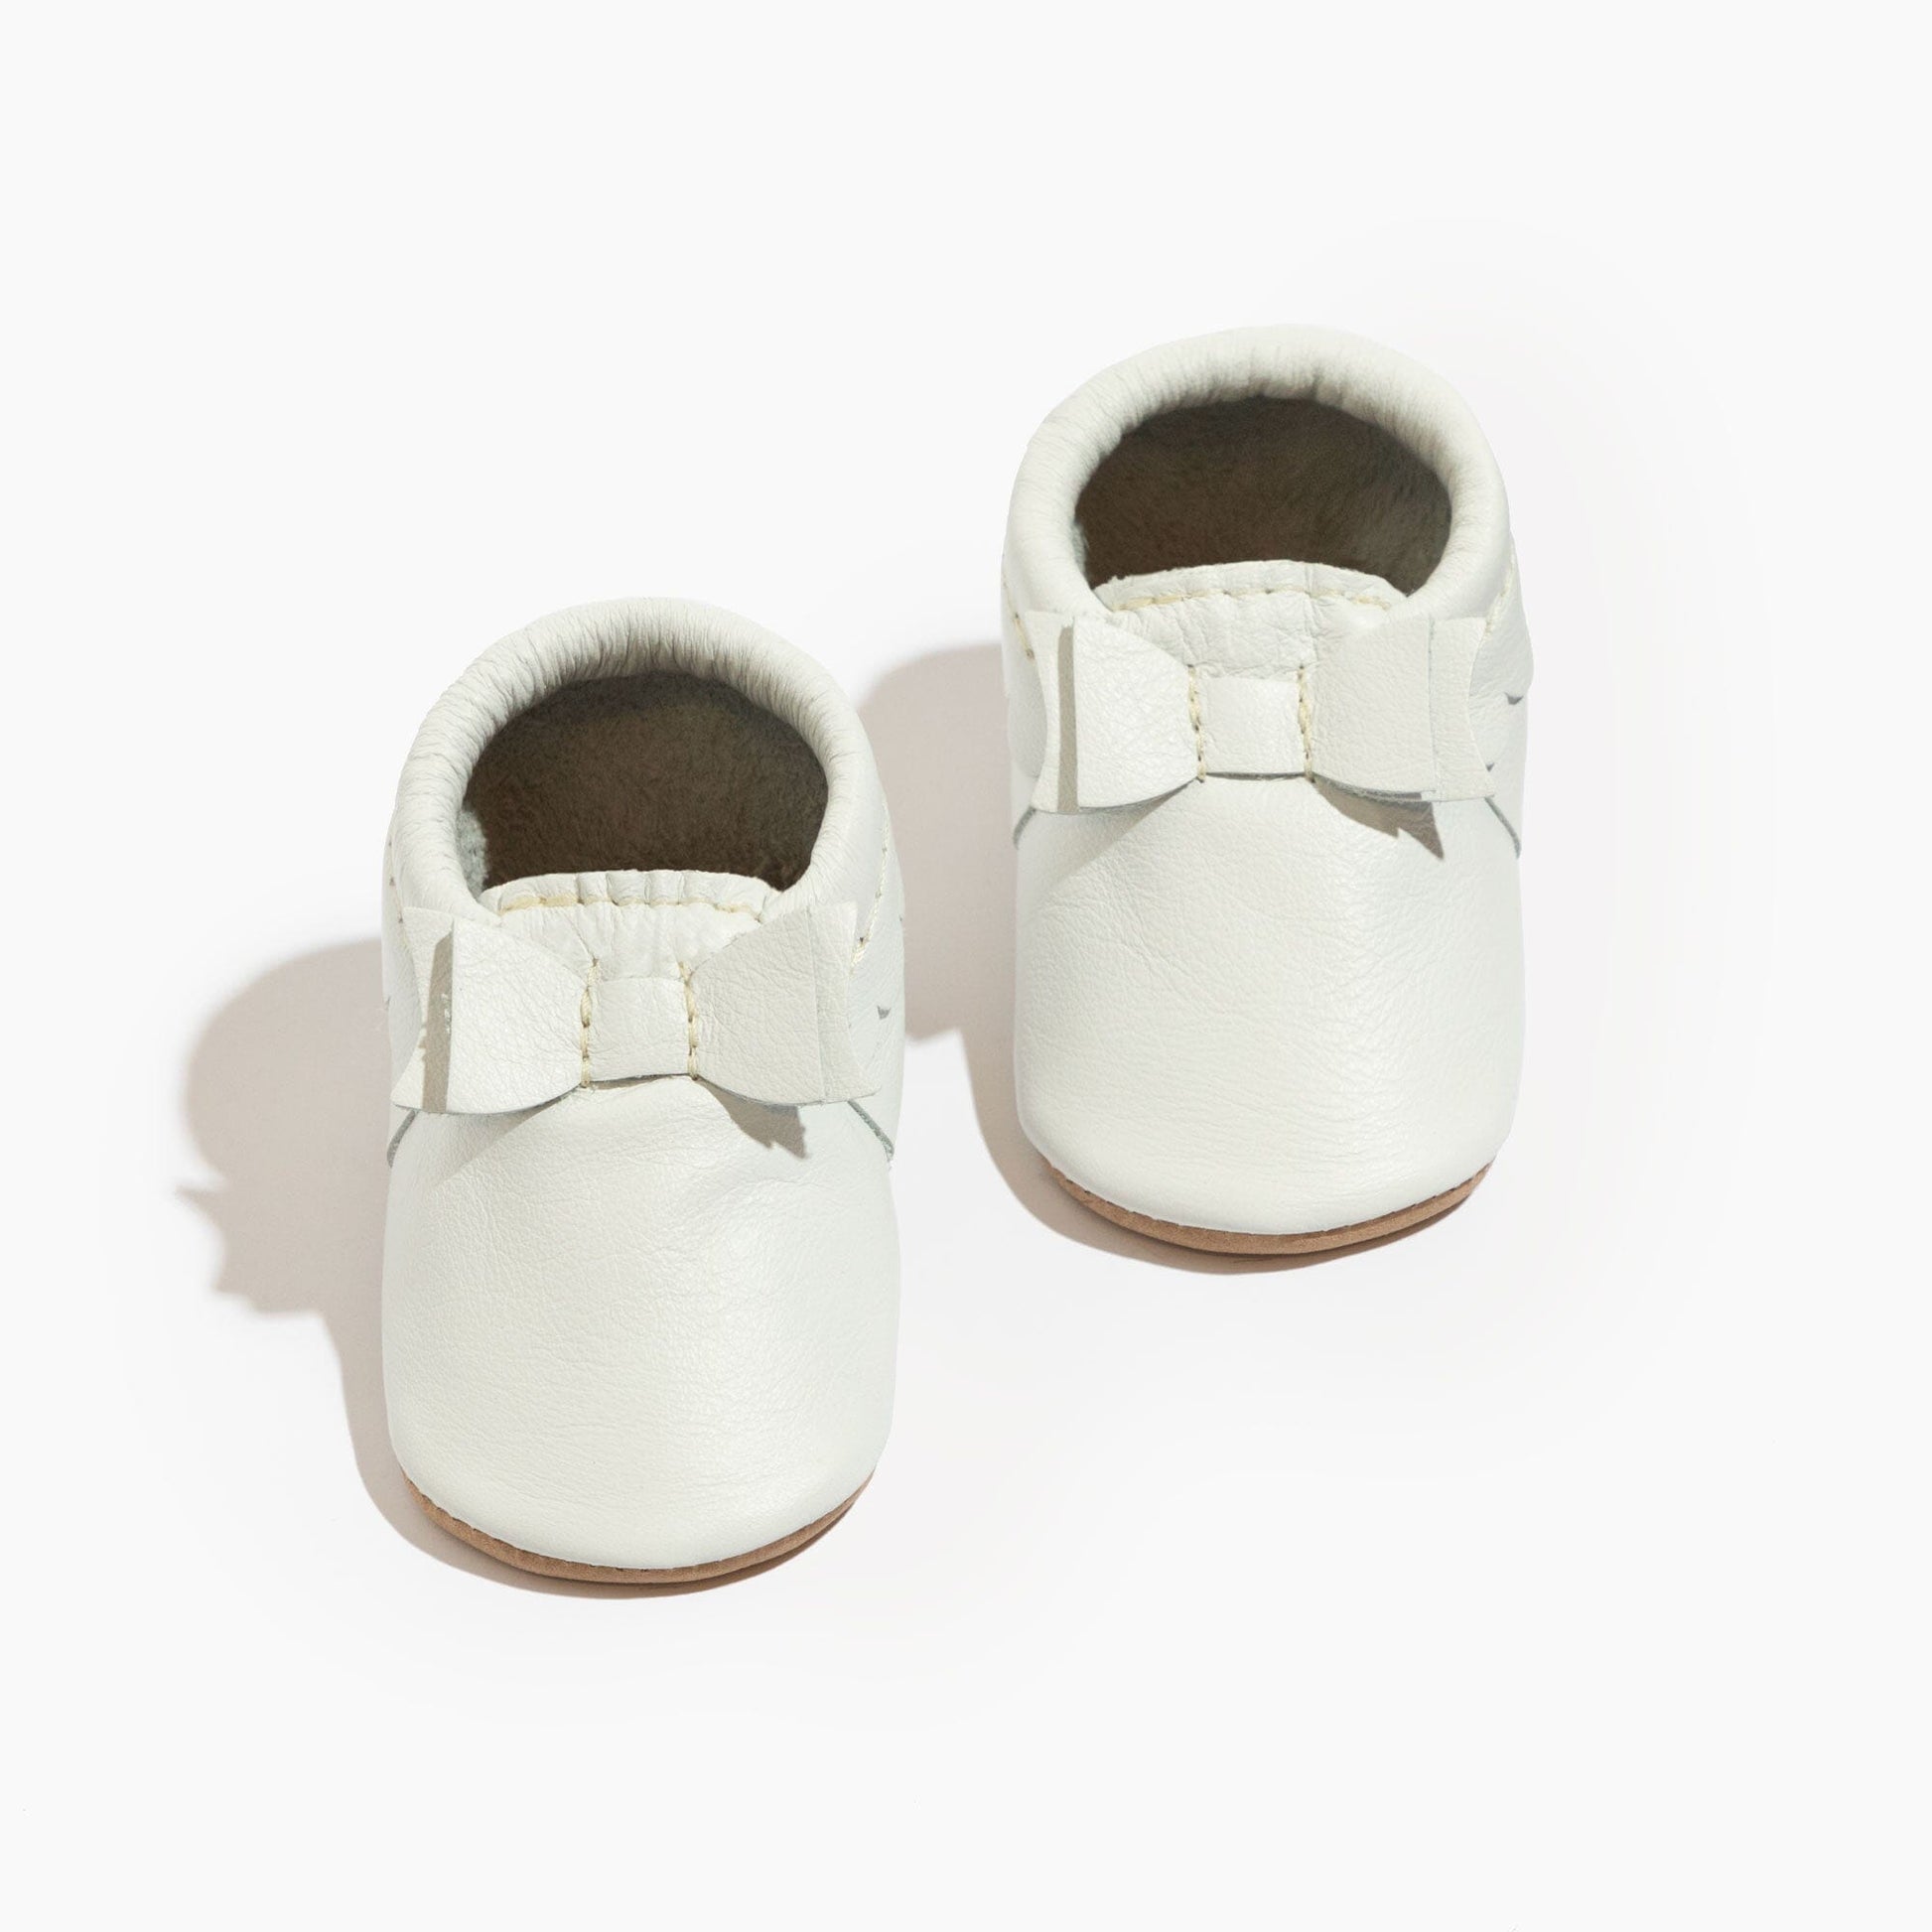 Toasted Bright White Bow Baby Shoe Bow Mocc Soft Sole 